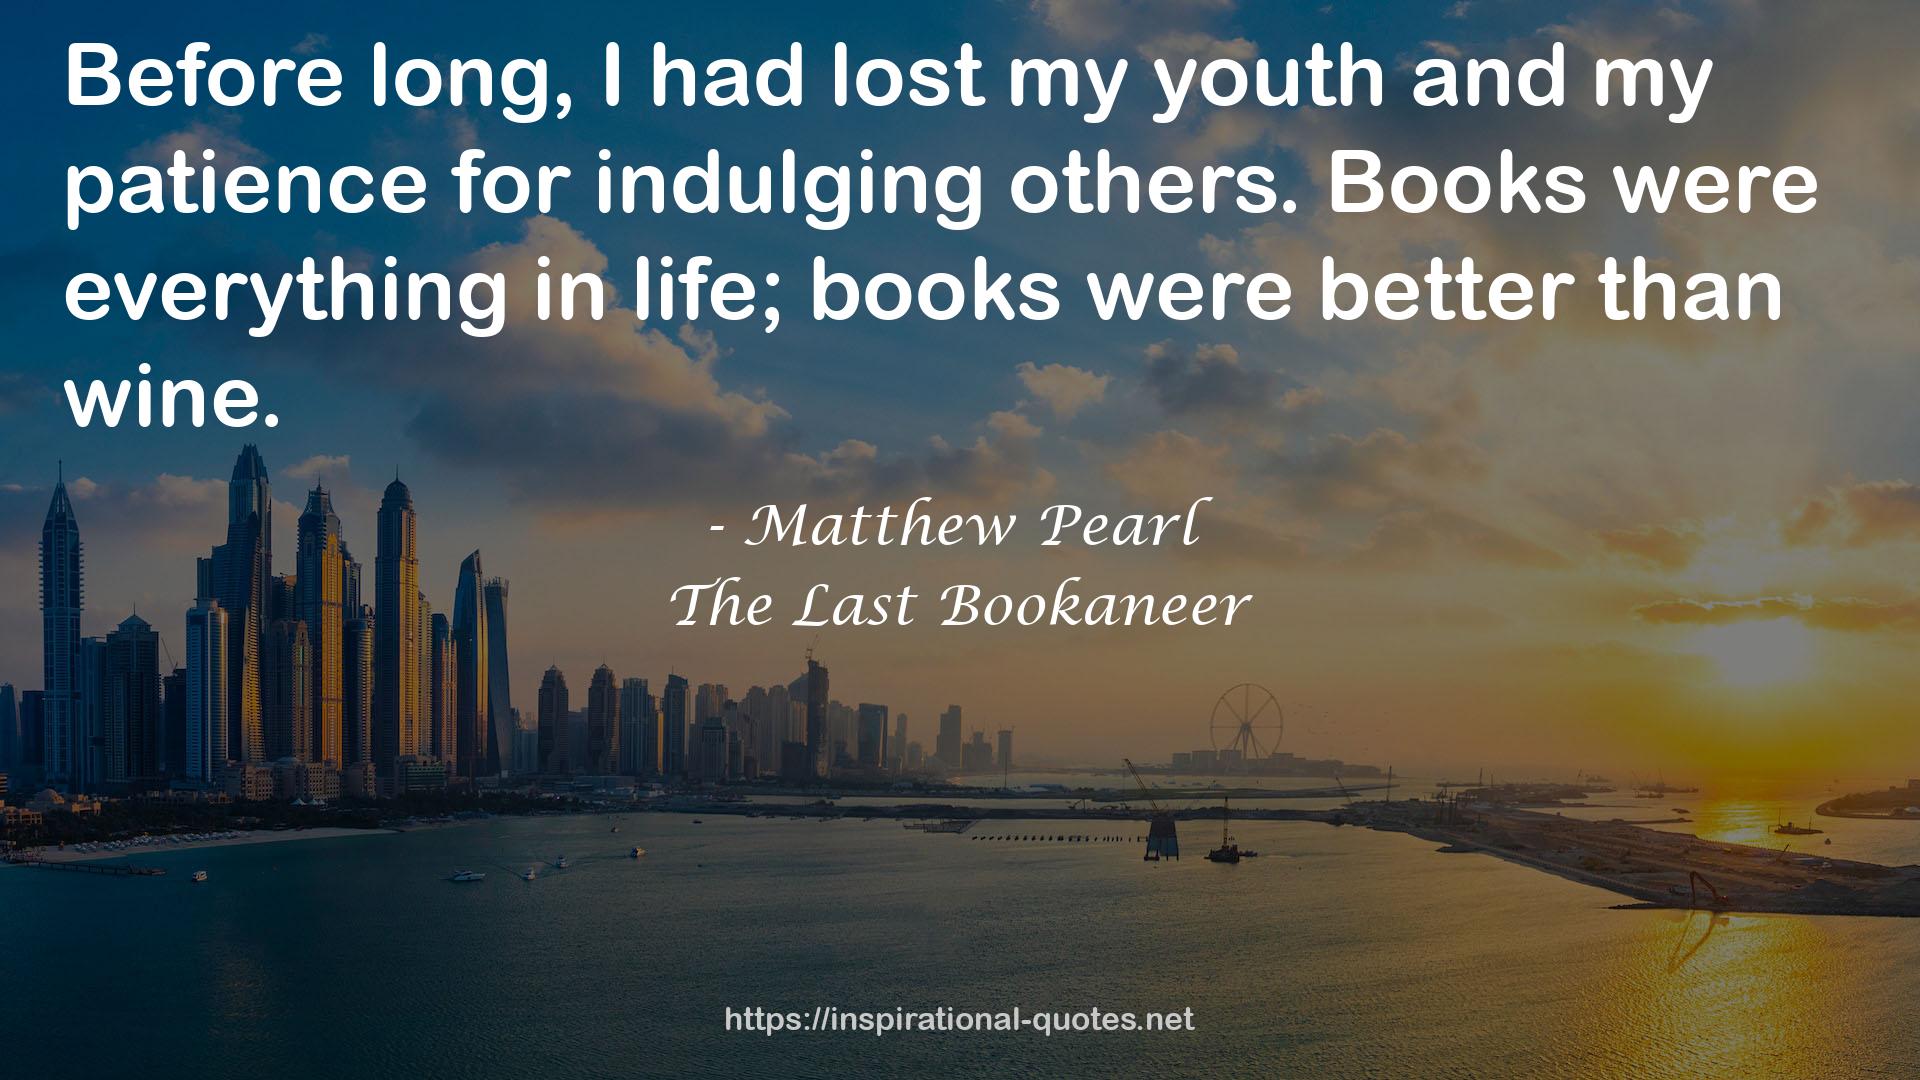 Matthew Pearl QUOTES